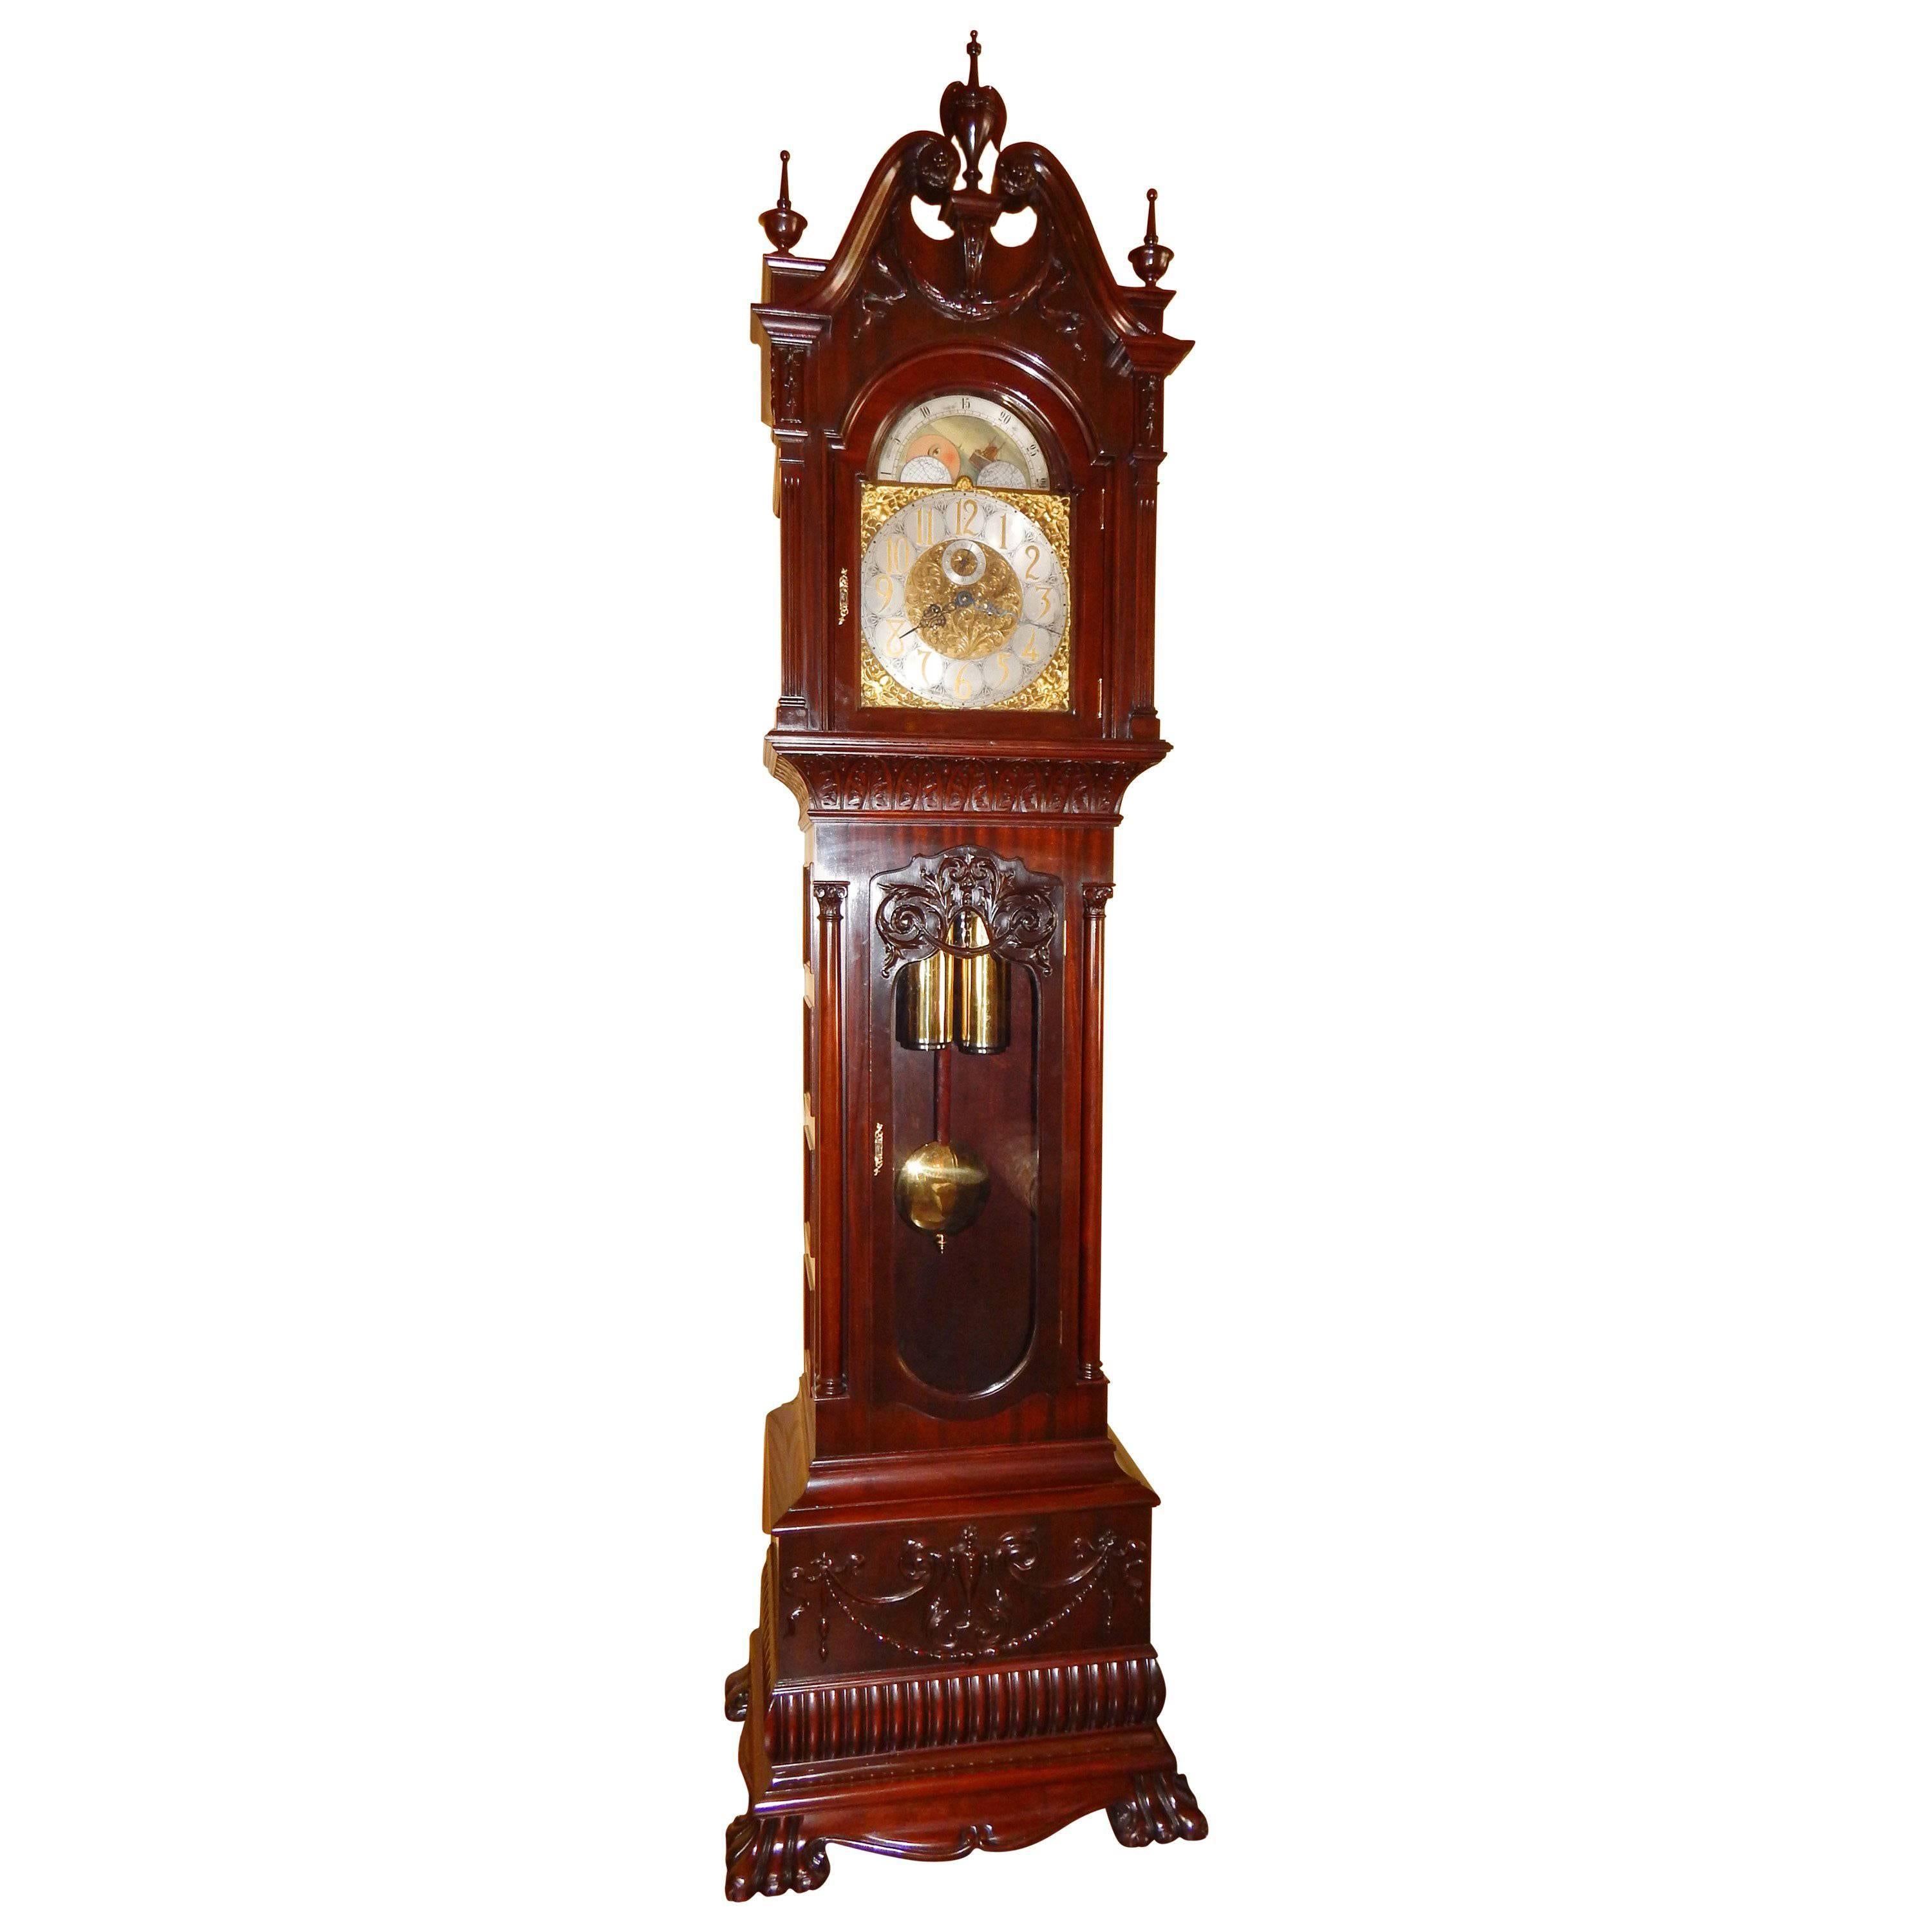 Monumental and Rare Carved Mahogany Grandfather Clock by R. Korfhage For Sale